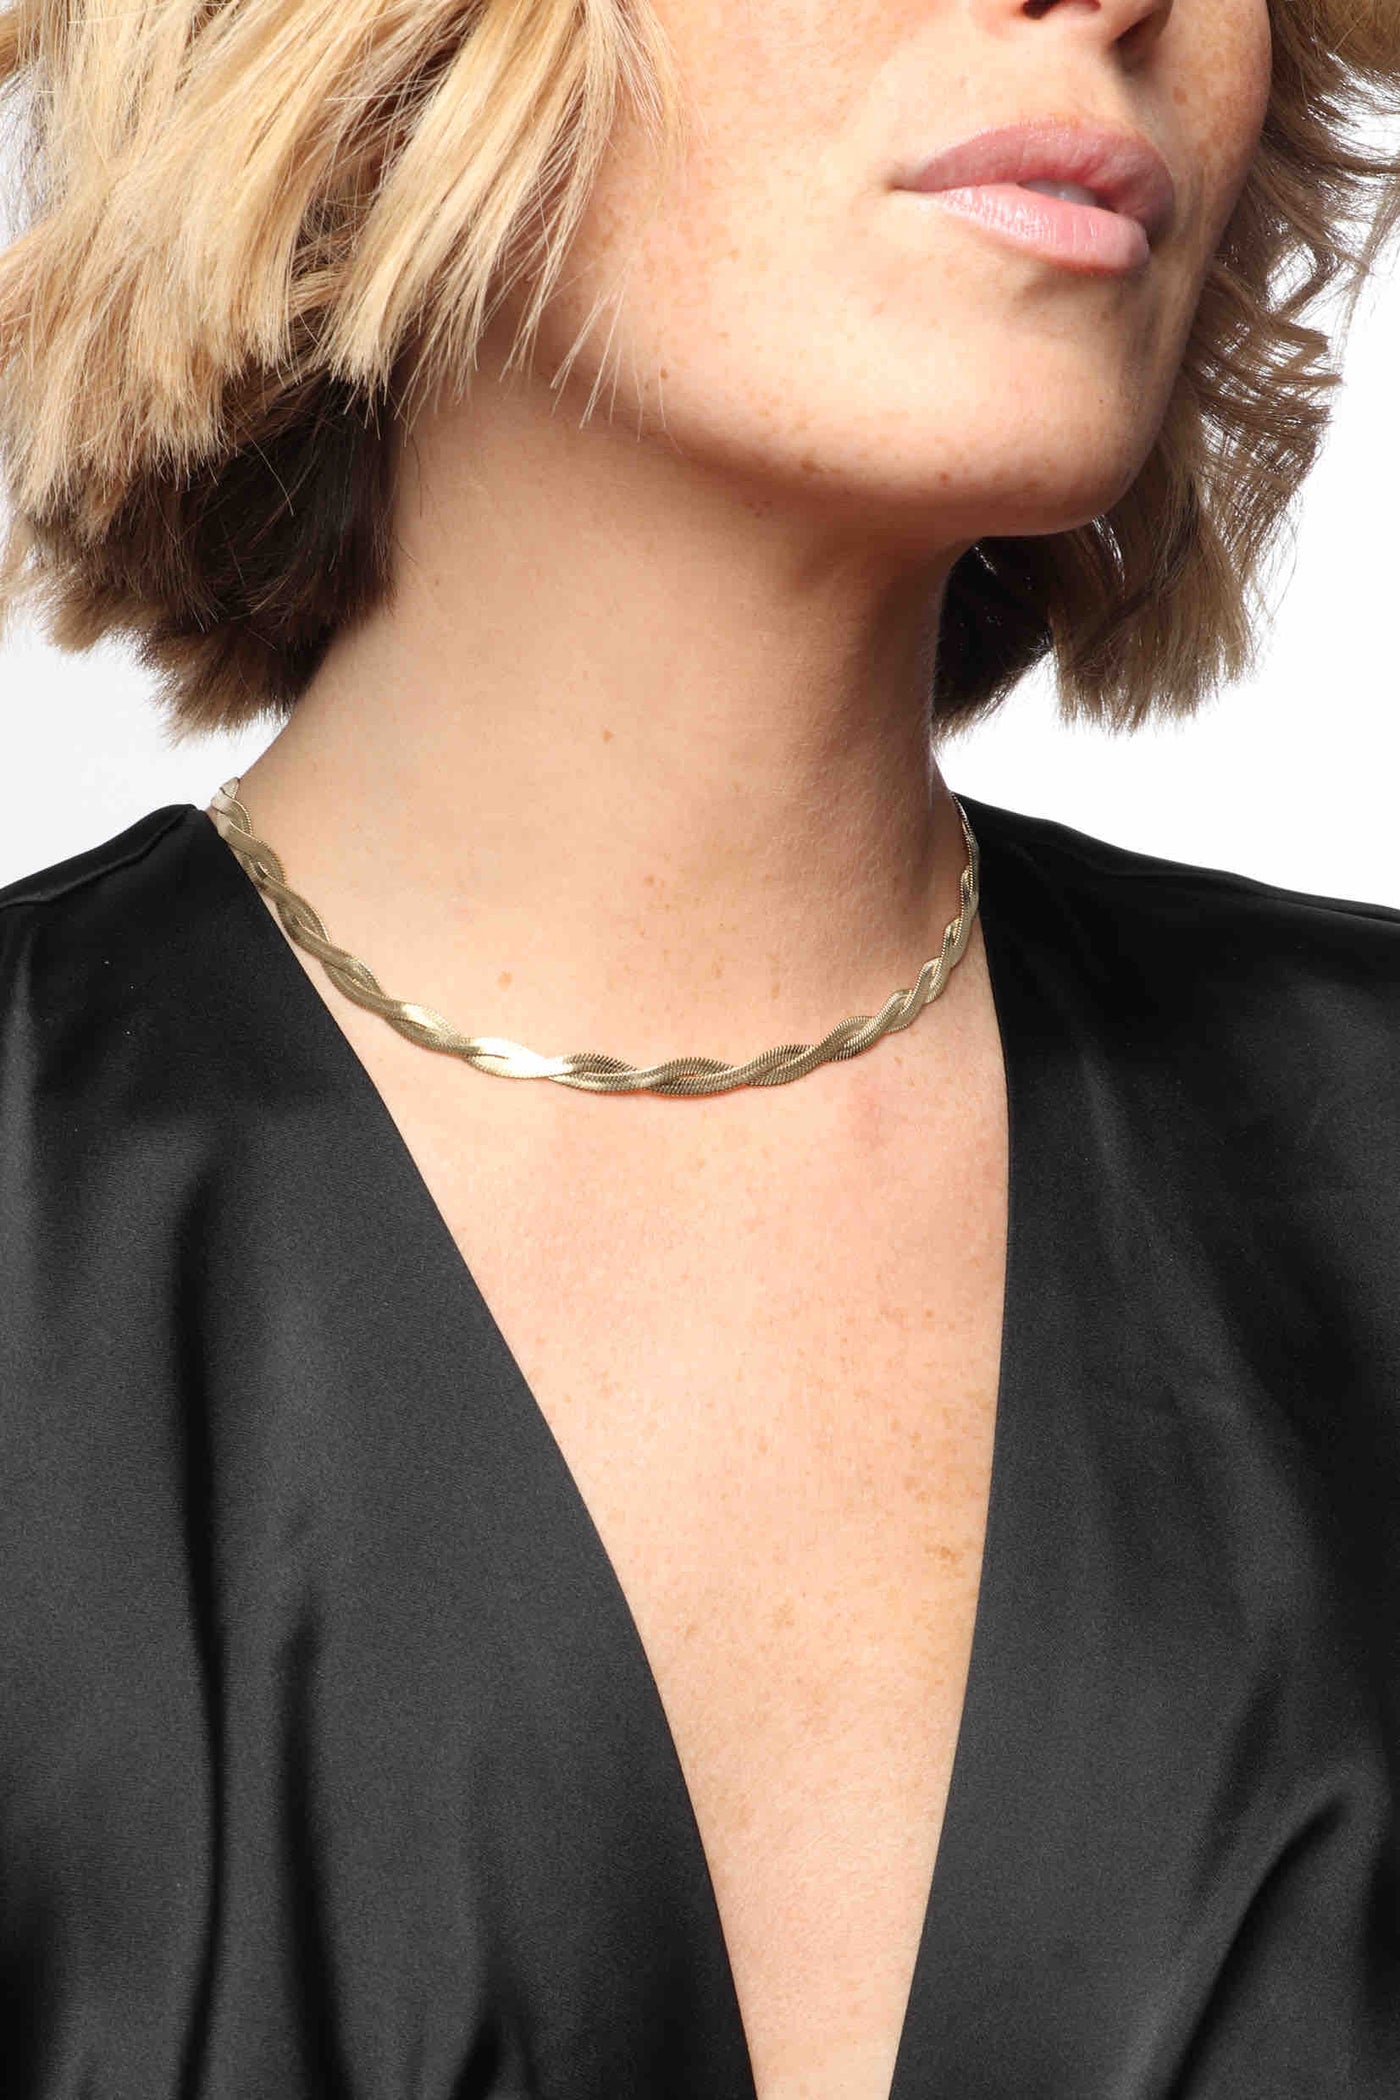 Marrin Costello wearing Marrin Costello Jewelry Ramsey Twist Chain snake herringbone chain braided together with lobster clasp closure and extender. Waterproof, sustainable, hypoallergenic. 14k gold plated stainless steel.